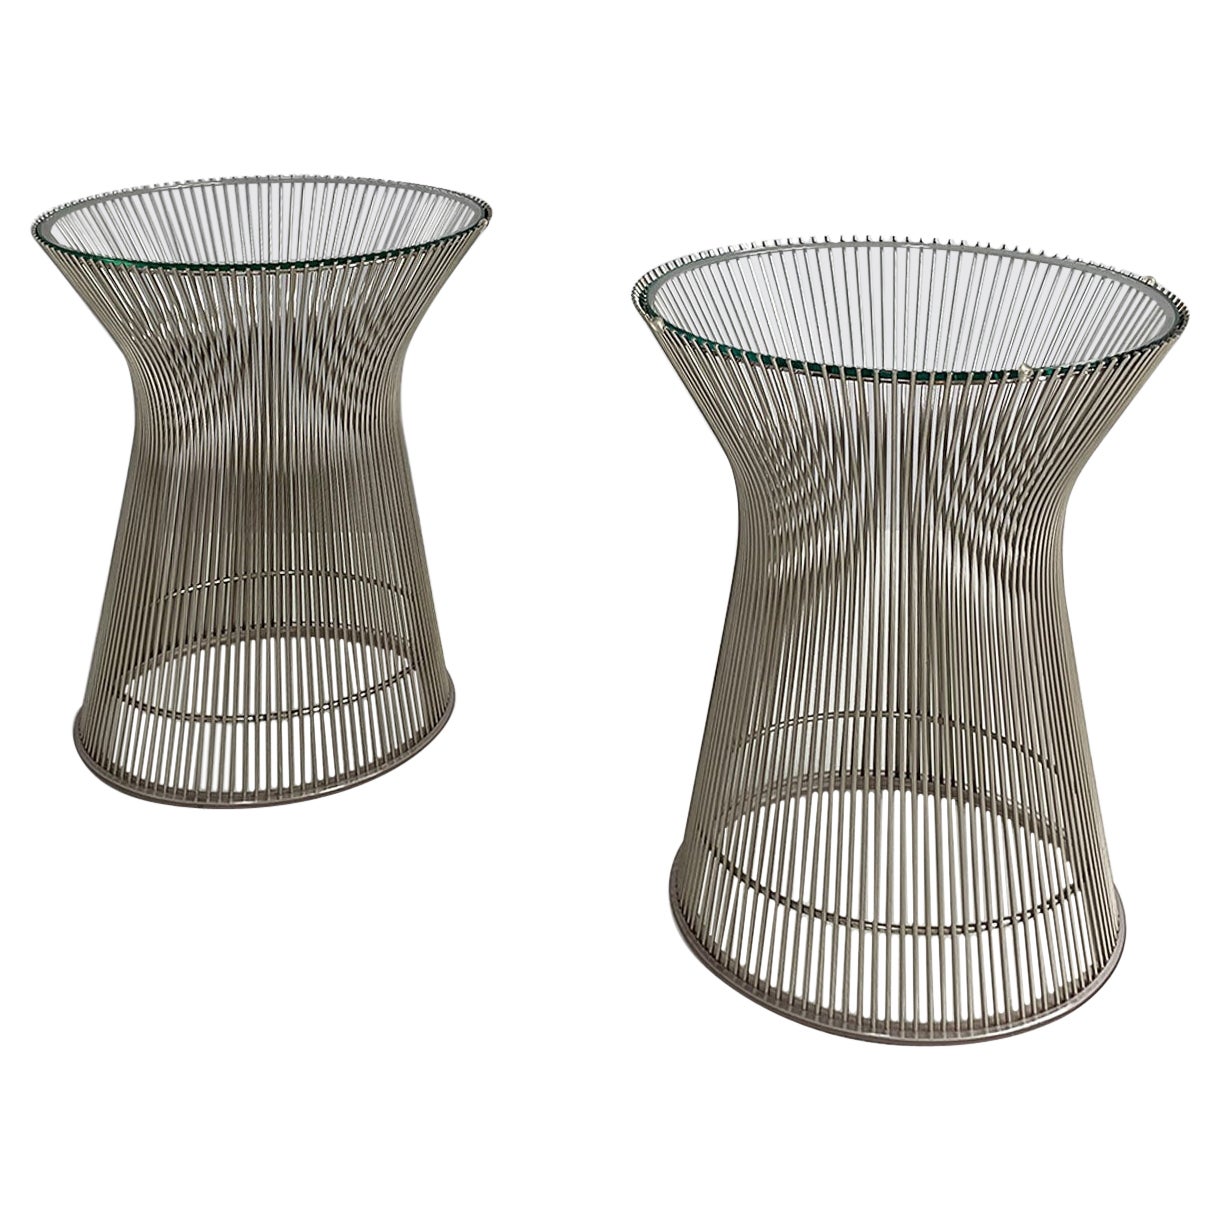 American modern steel and crystal side tables by Warren Platner for Knoll, 1966 For Sale